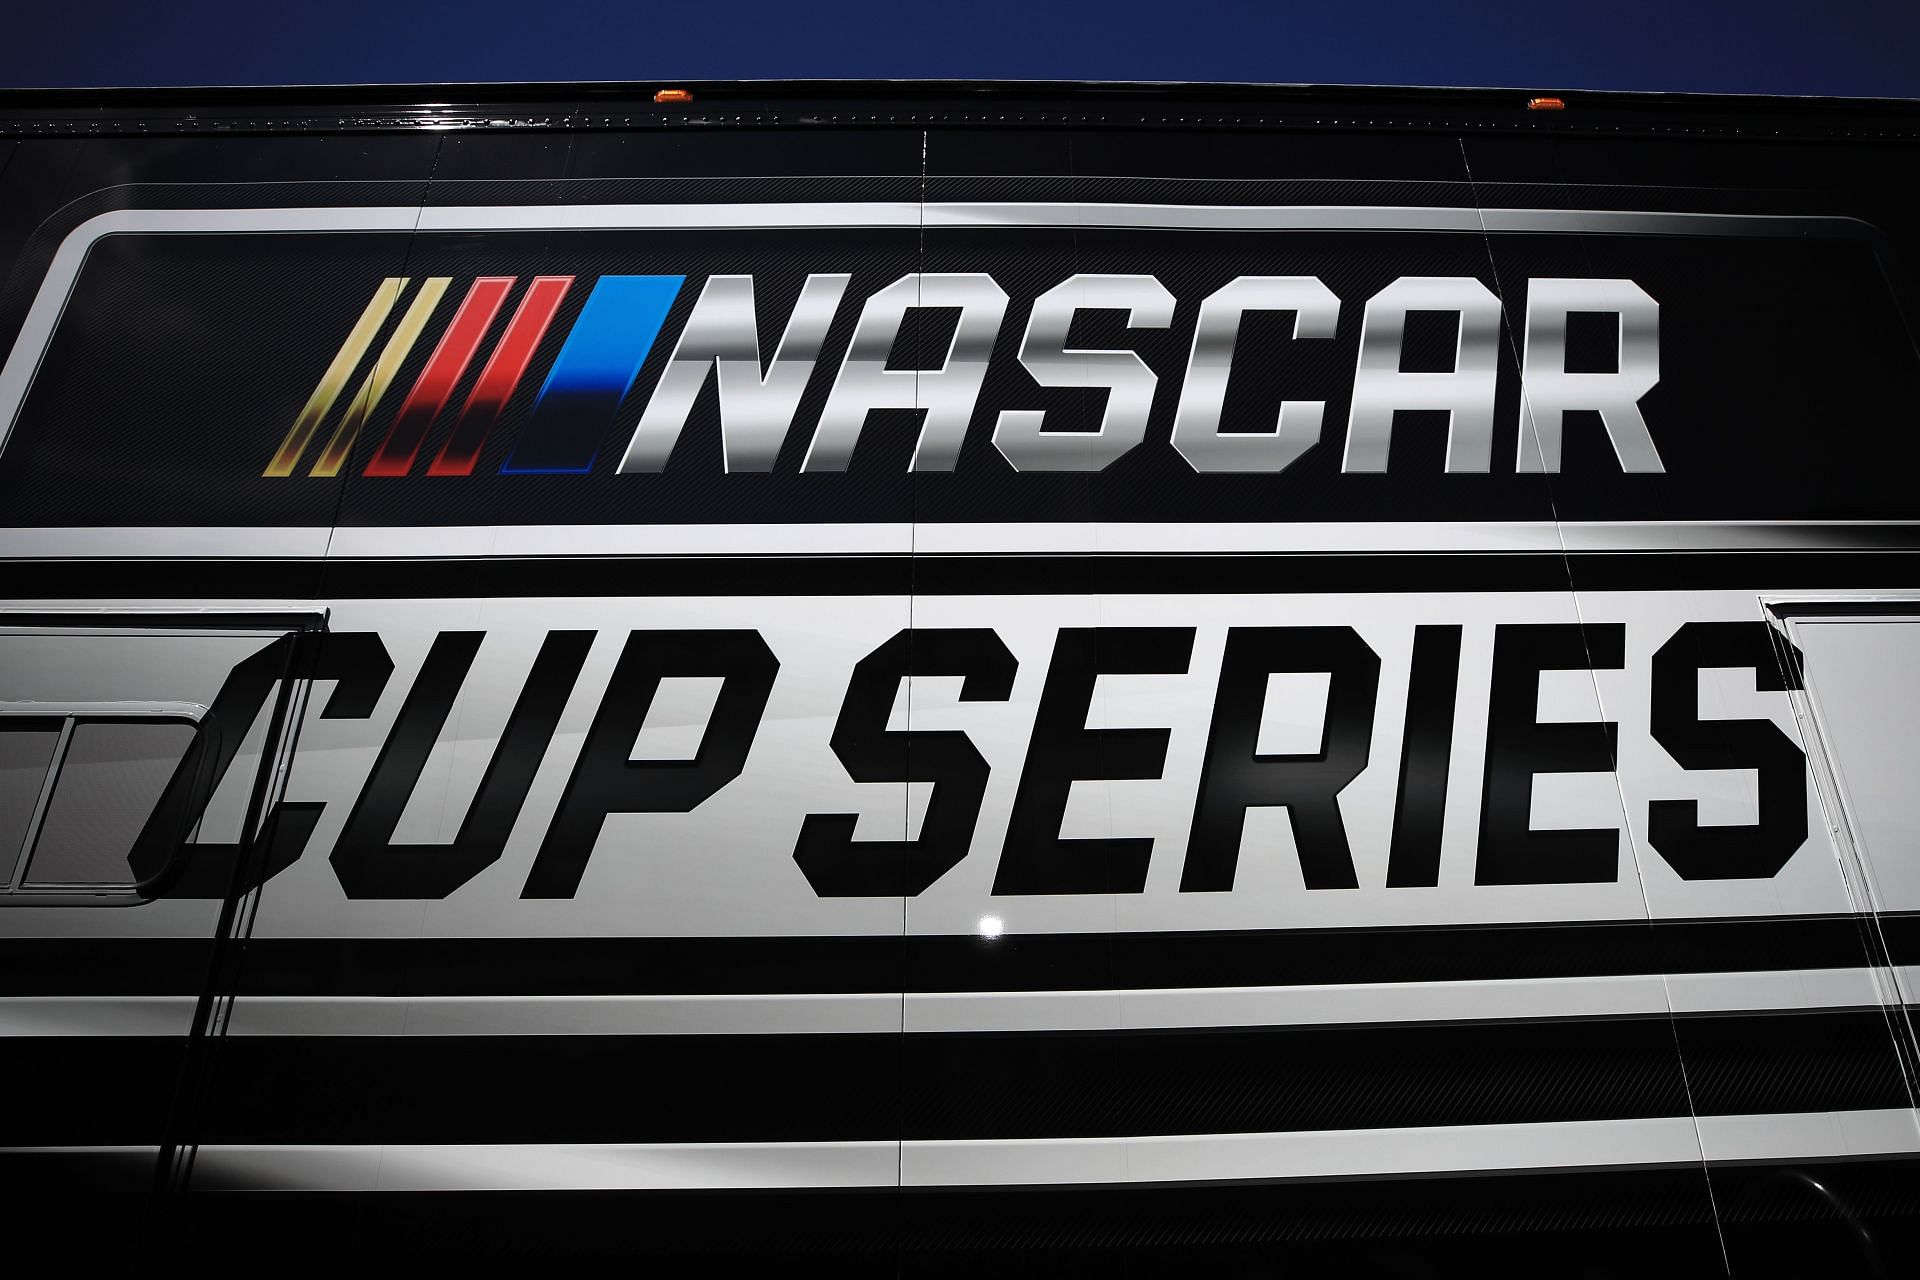 A general view of the NASCAR Cup Series logo during practice for the NASCAR Cup Series FanShield 500 at Phoenix Raceway. (Photo by Chris Graythen/Getty Images)